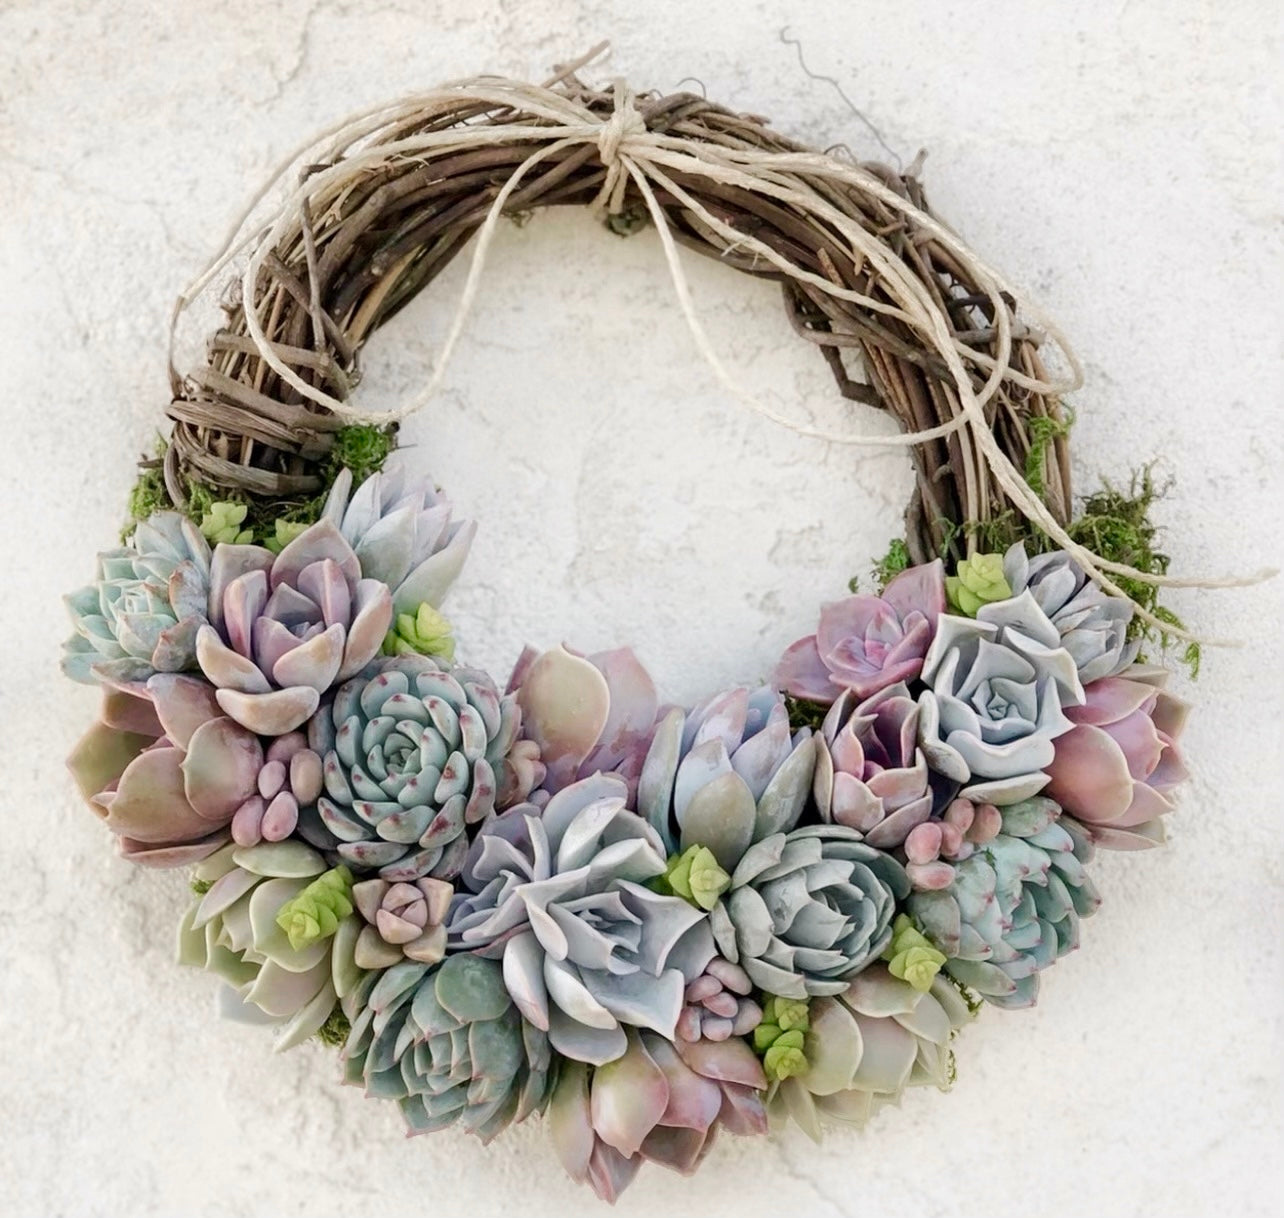 Living Succulent Air Plant Indoor/outdoor Grapevine Wreath 14 Inch 